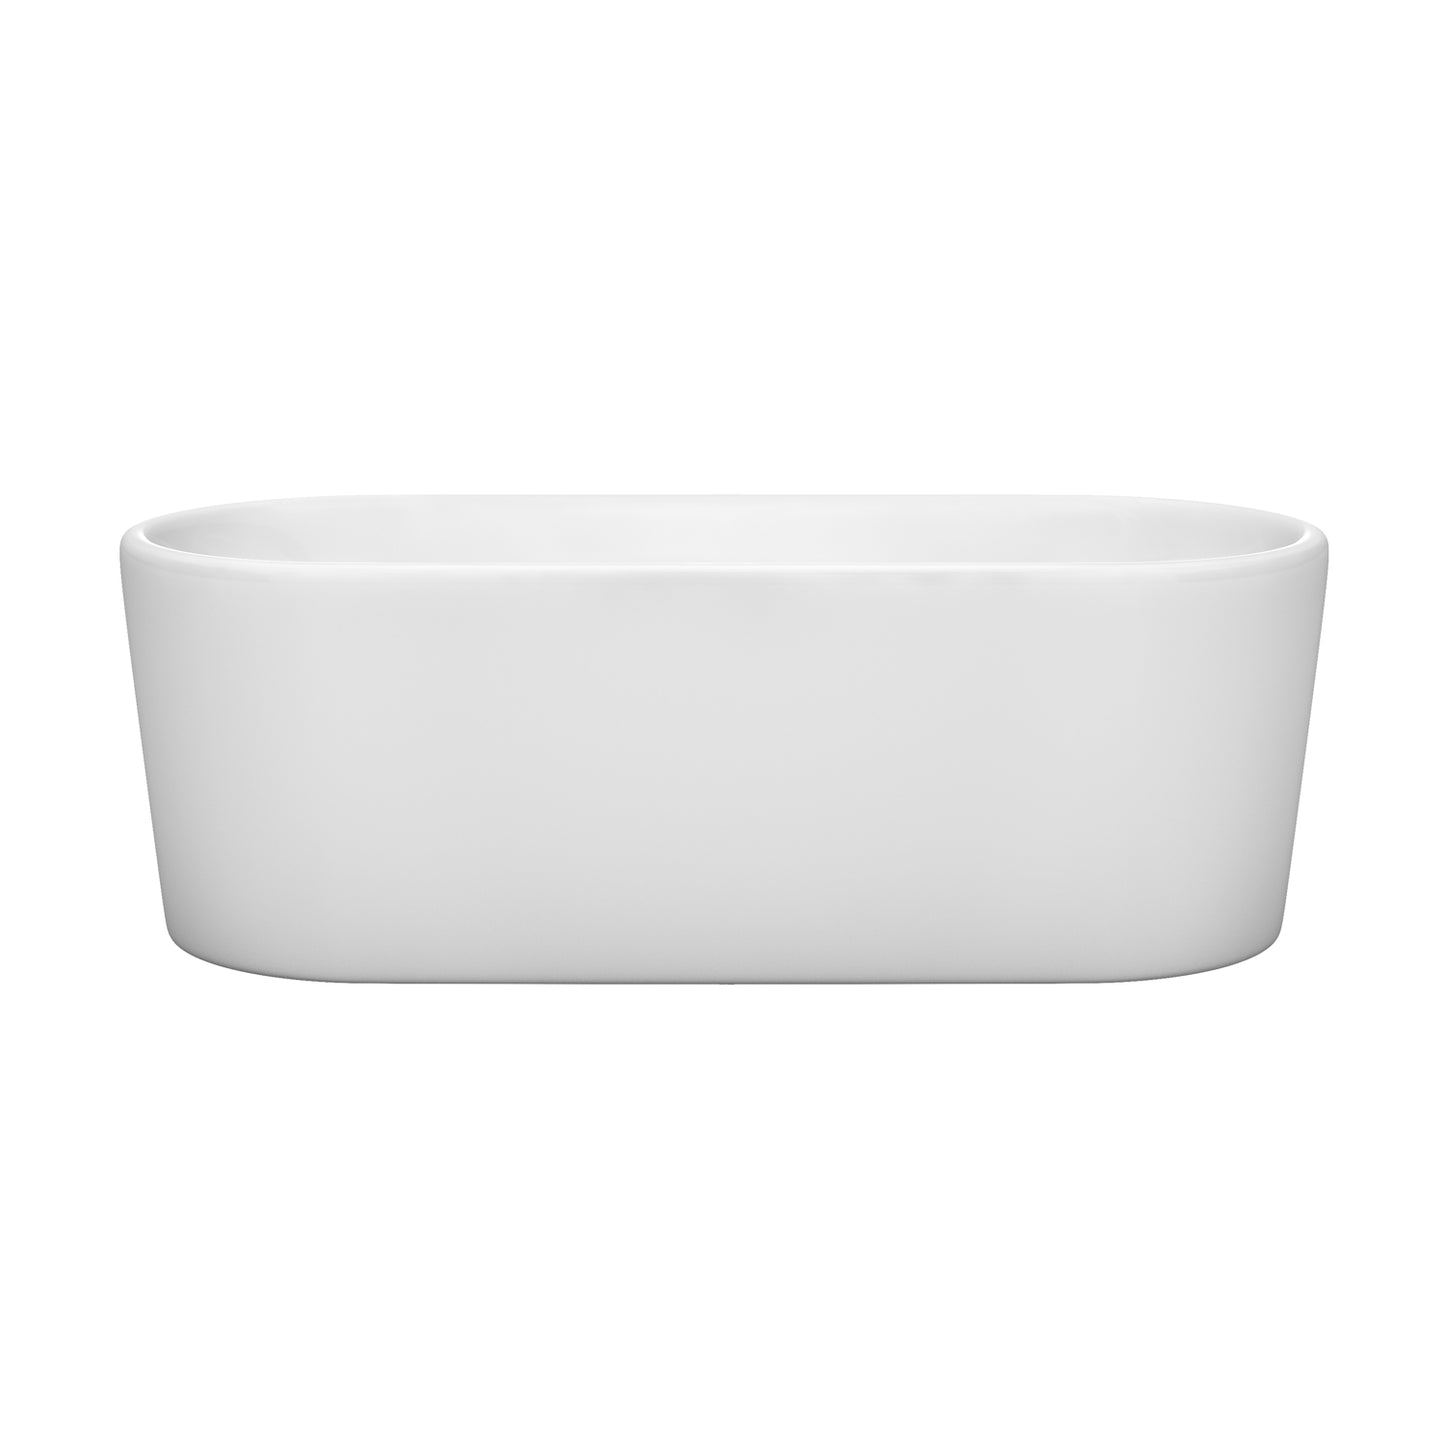 Wyndham Collection Ursula 67 Inch Freestanding Bathtub in White with Brushed Nickel Drain and Overflow Trim - Luxe Bathroom Vanities